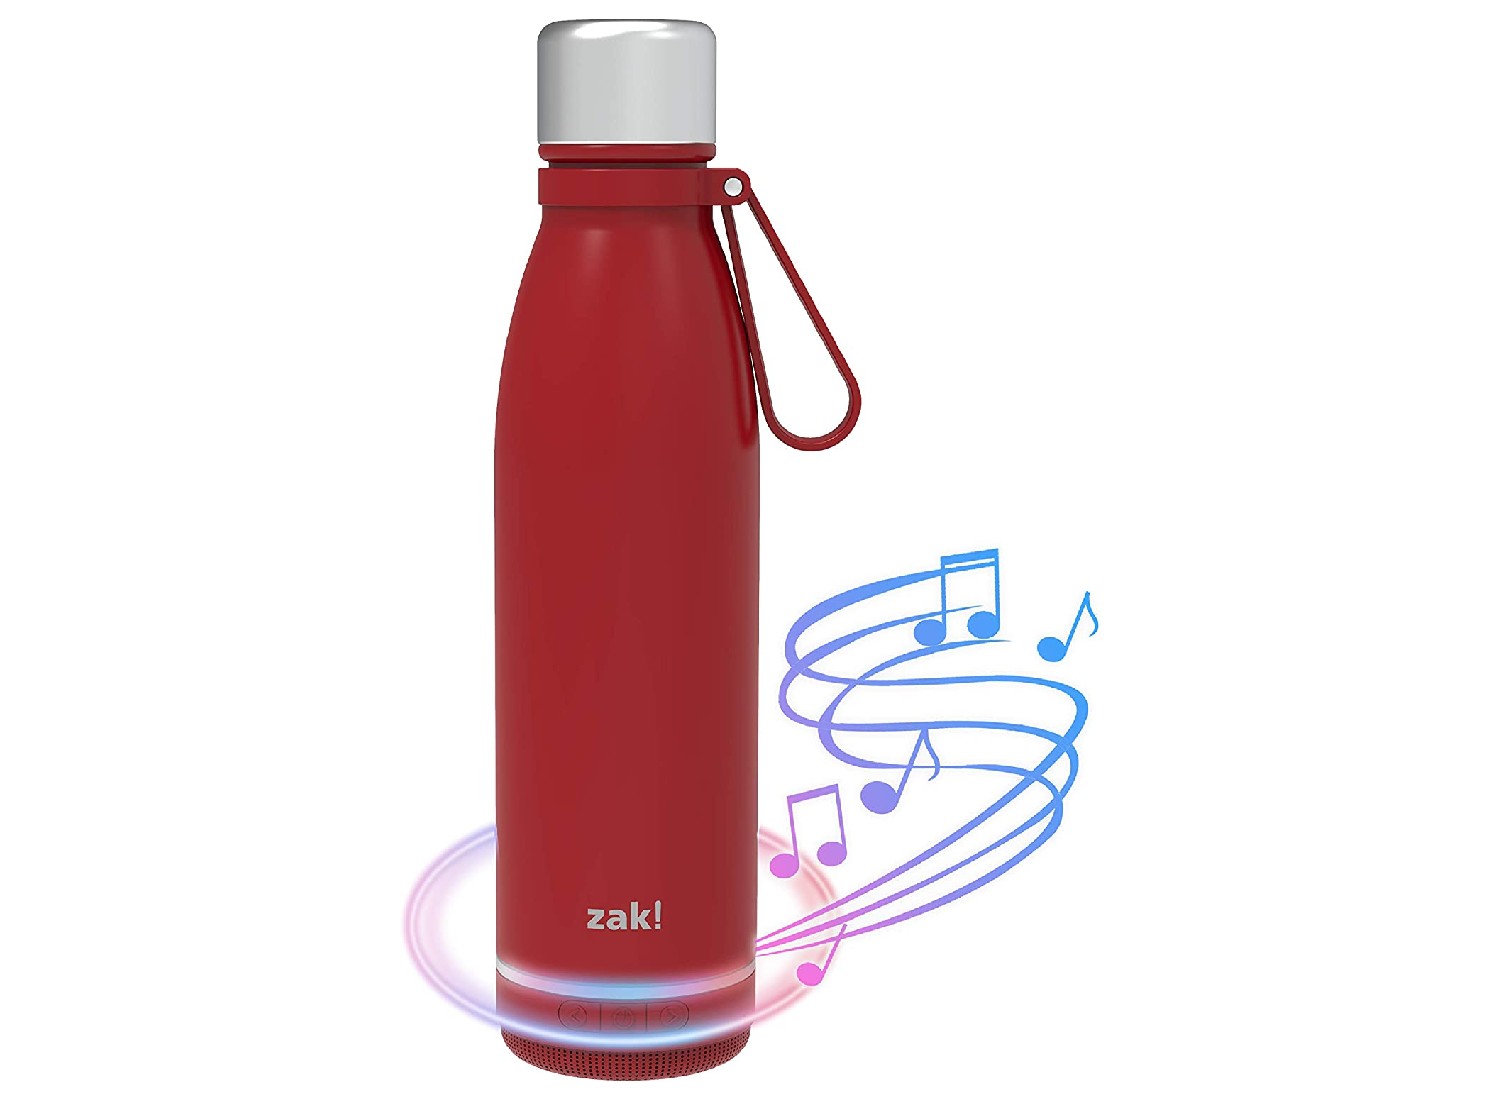 Vacuum Insulated Flask Free Reusable Straws Set Leak Proof Metal Thermos for Cold & Hot Drinks XtremePeak Smart Water Bottle with Temperature Display 500ml/17oz Stainless Steel Water Bottle 